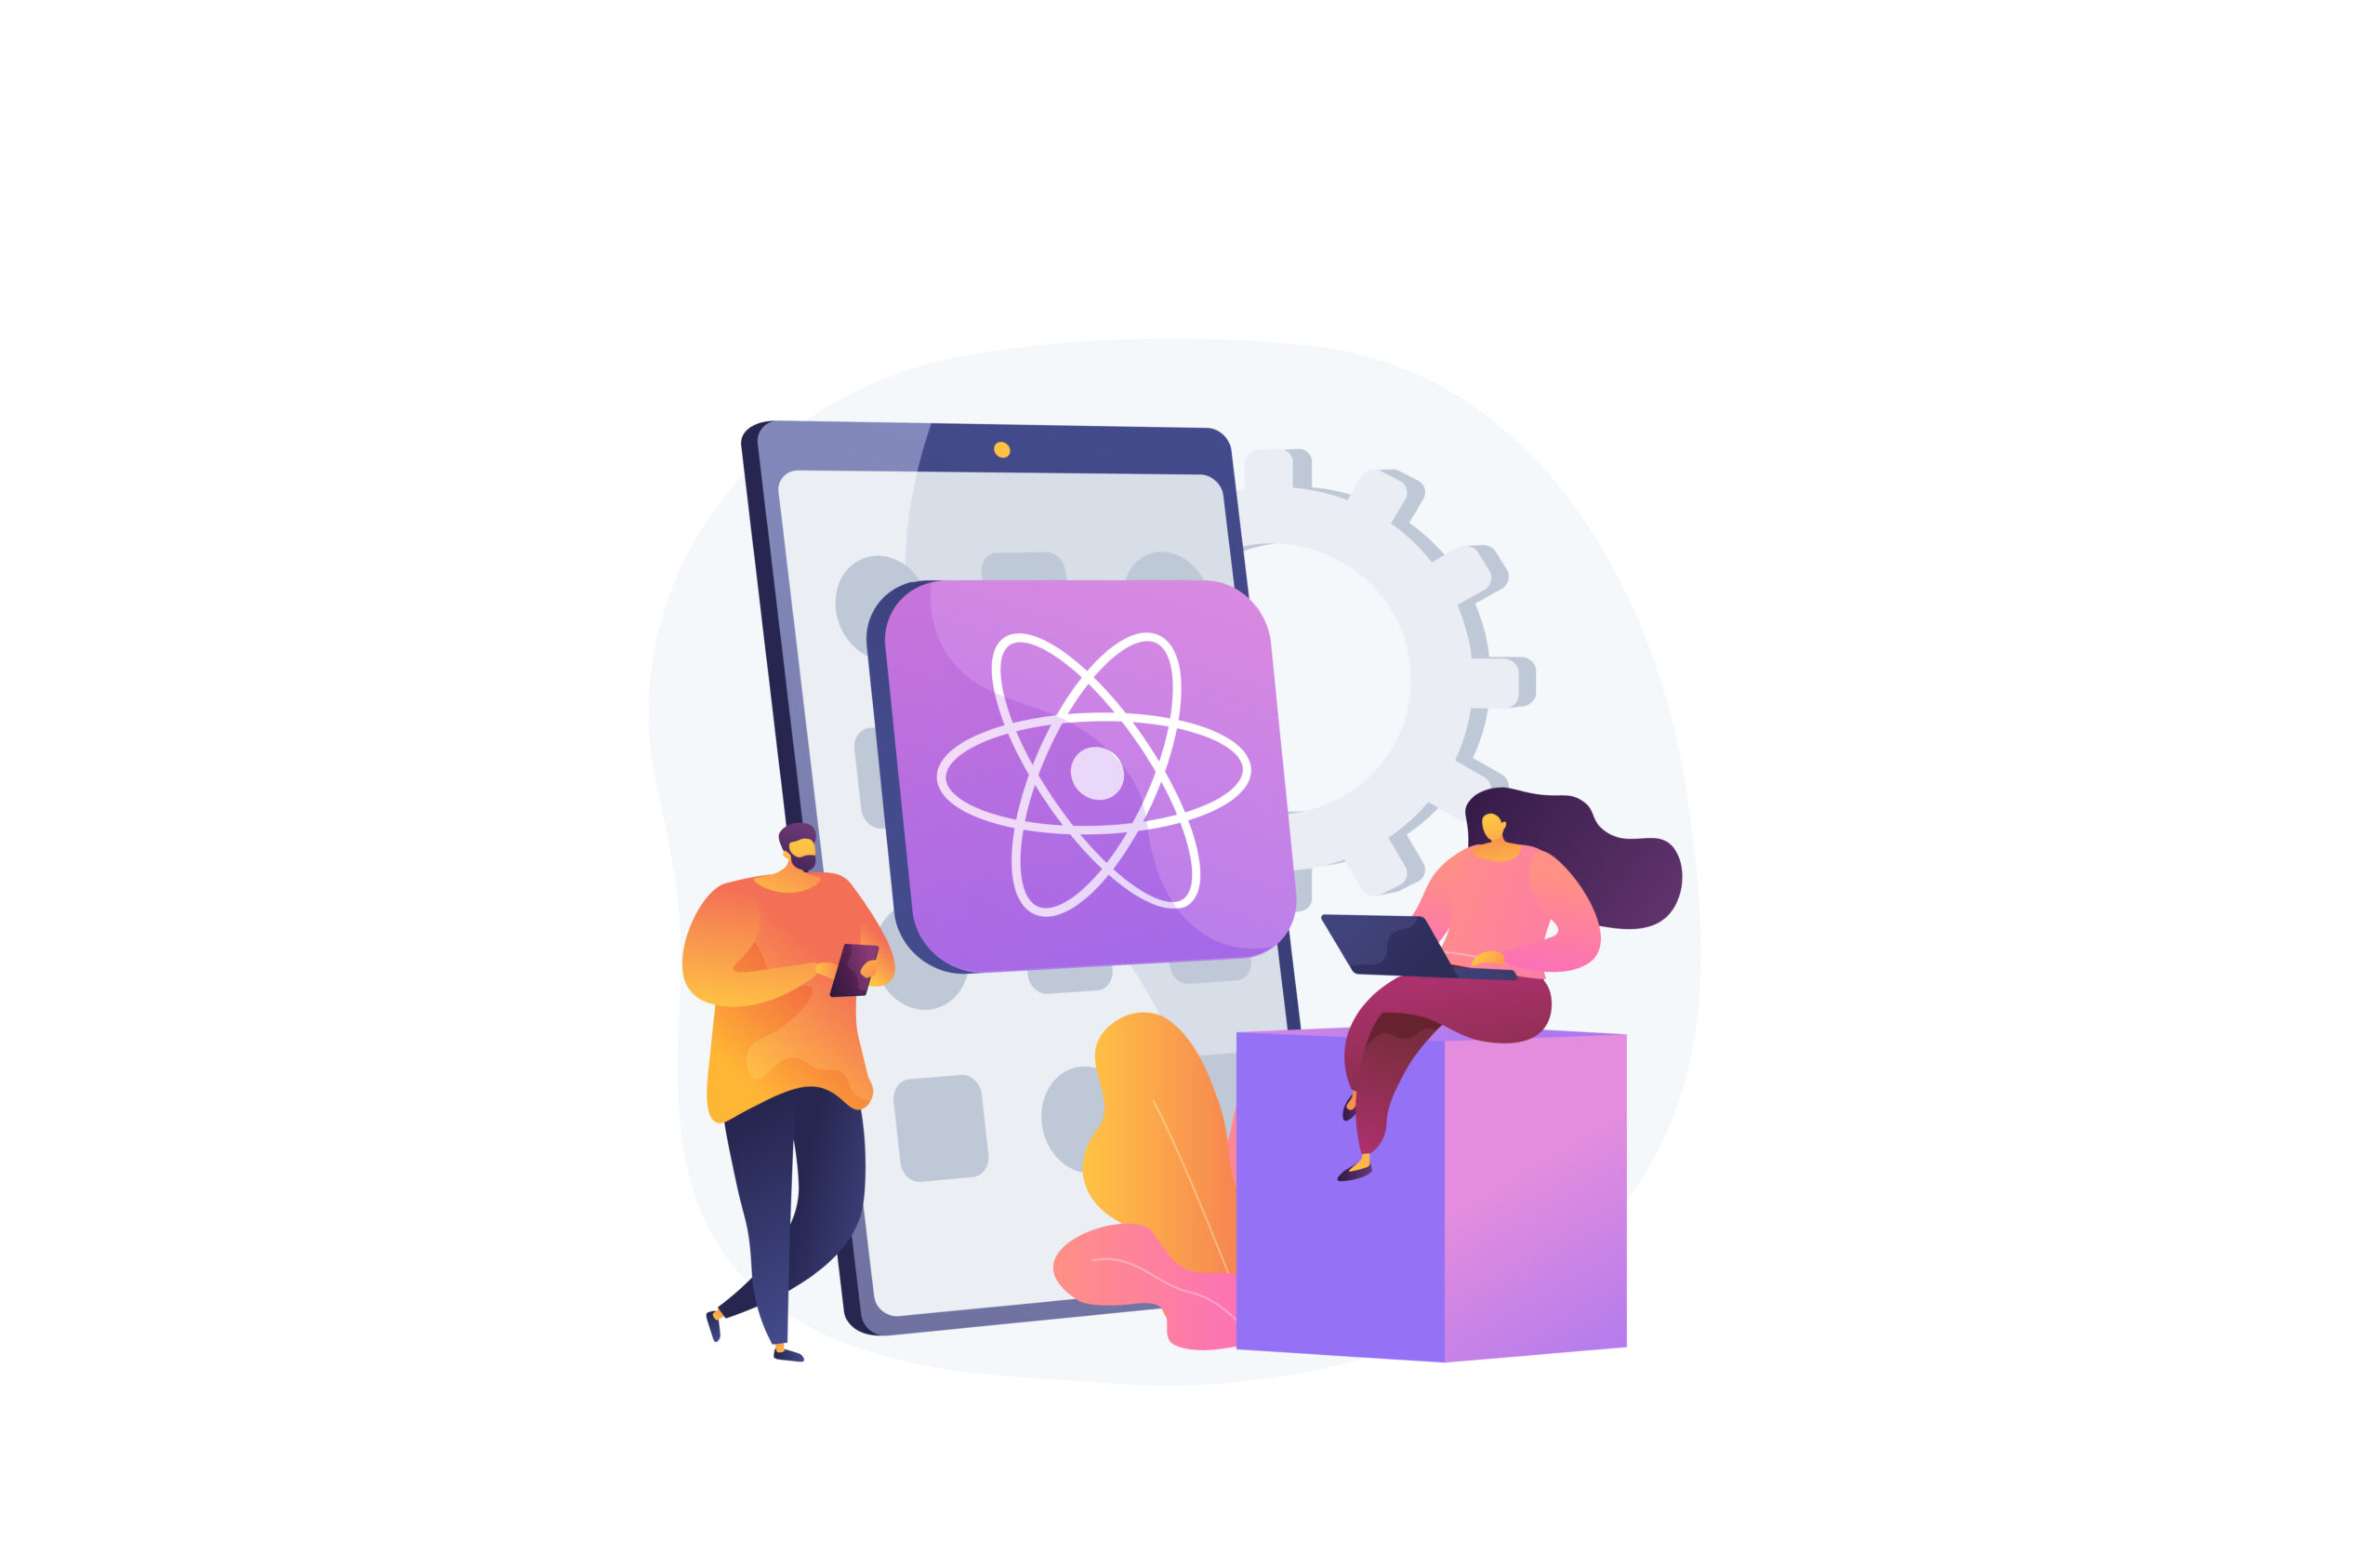 React Native: Pros and Cons for Business